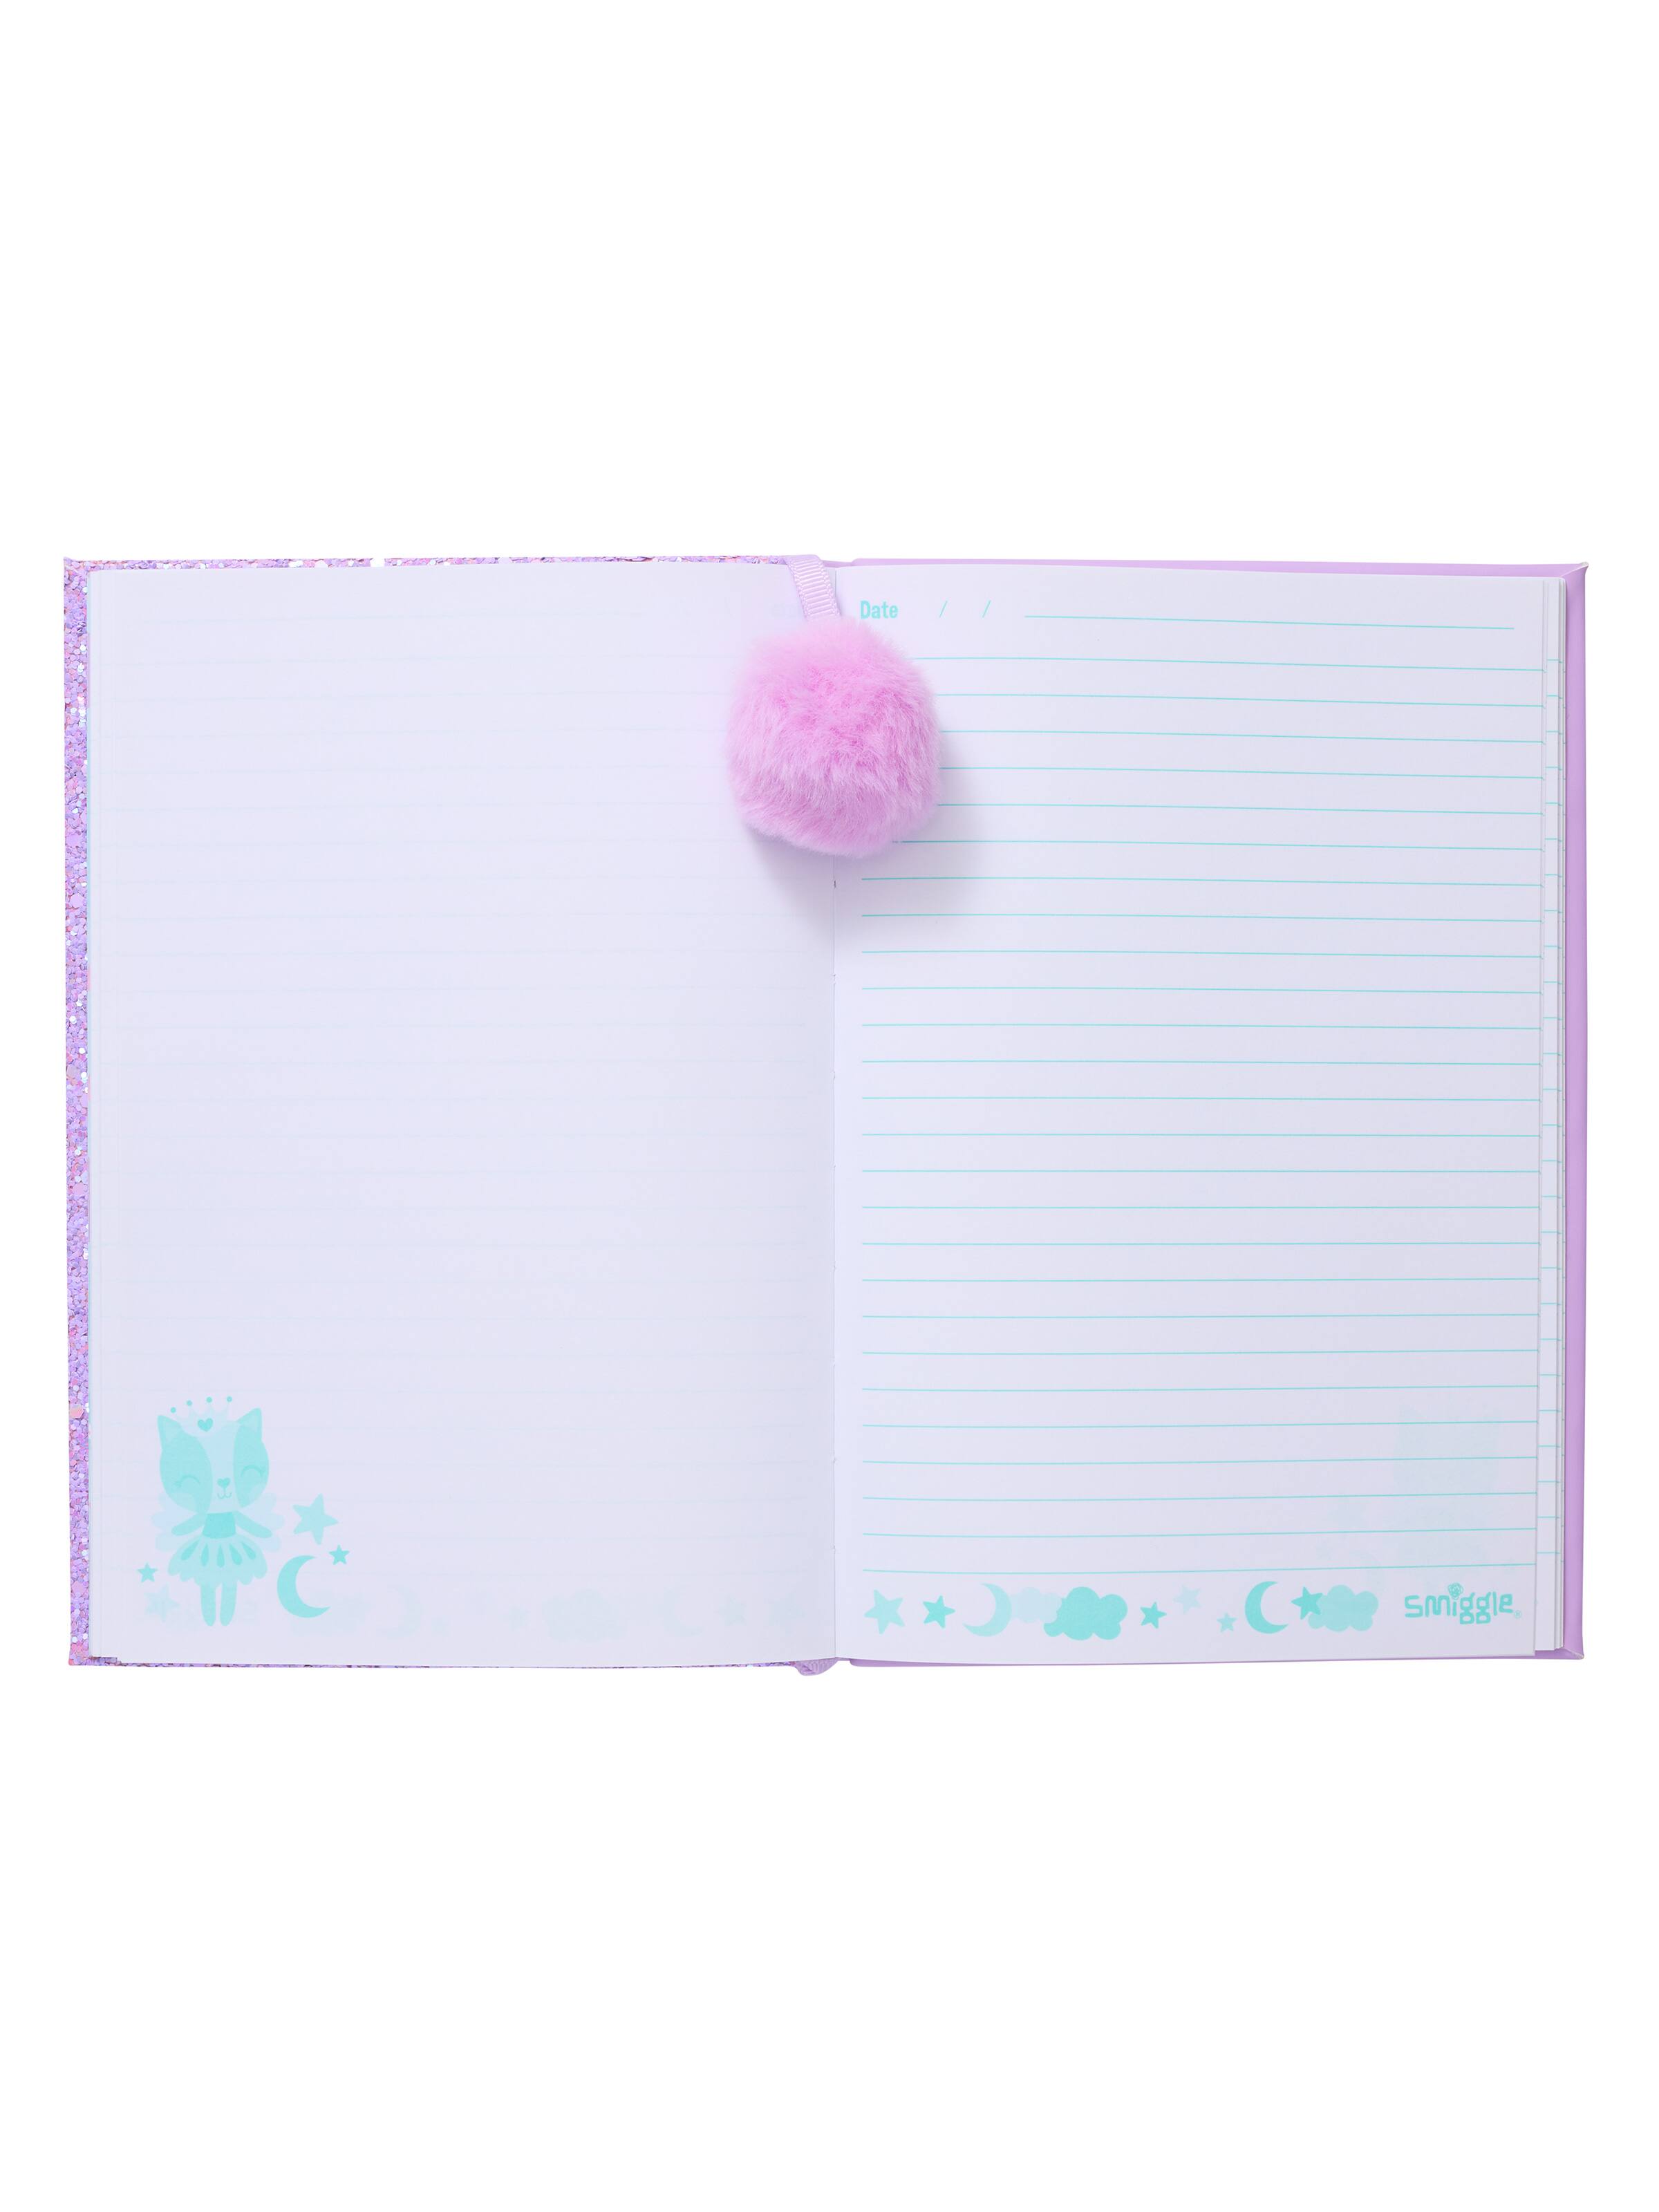 Refillable Notebook A4 Plush Cover Diary Plush Notebook With Lock